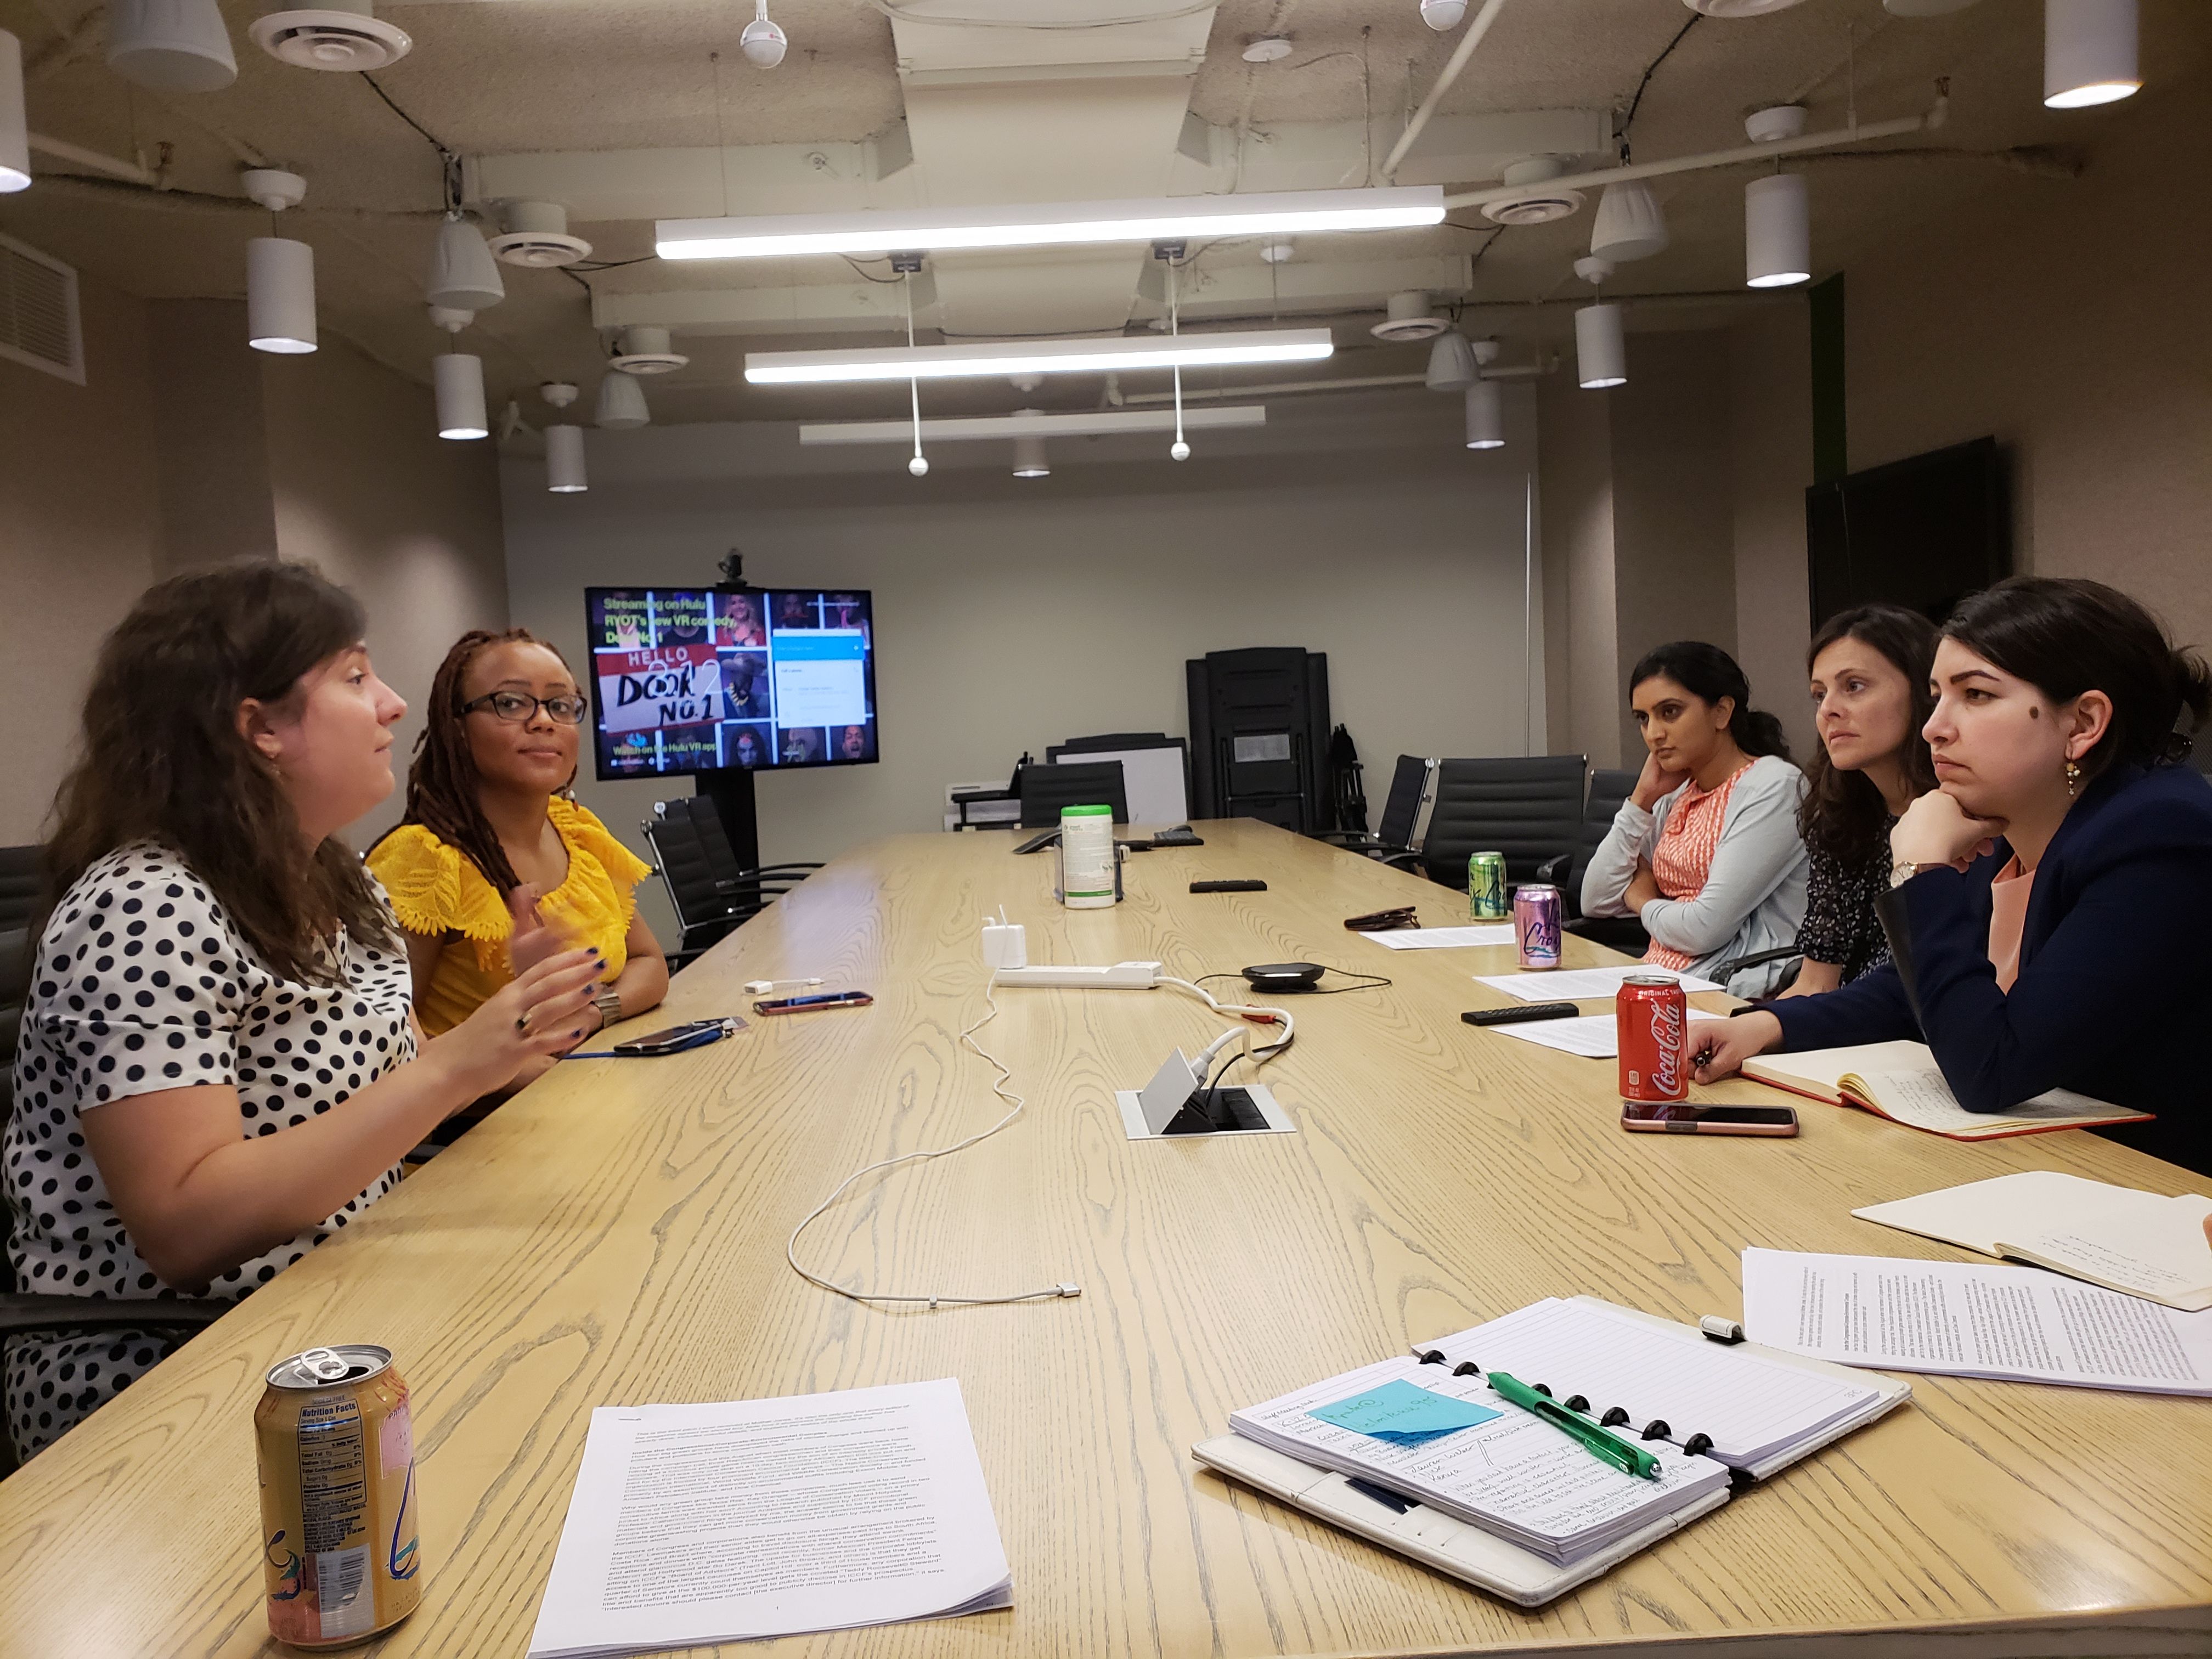 The fellows get a crash course on collecting quality audio and video in the field during a visit to Huffington Post. Image by Kayla Sharpe. Washington, D.C., 2018.